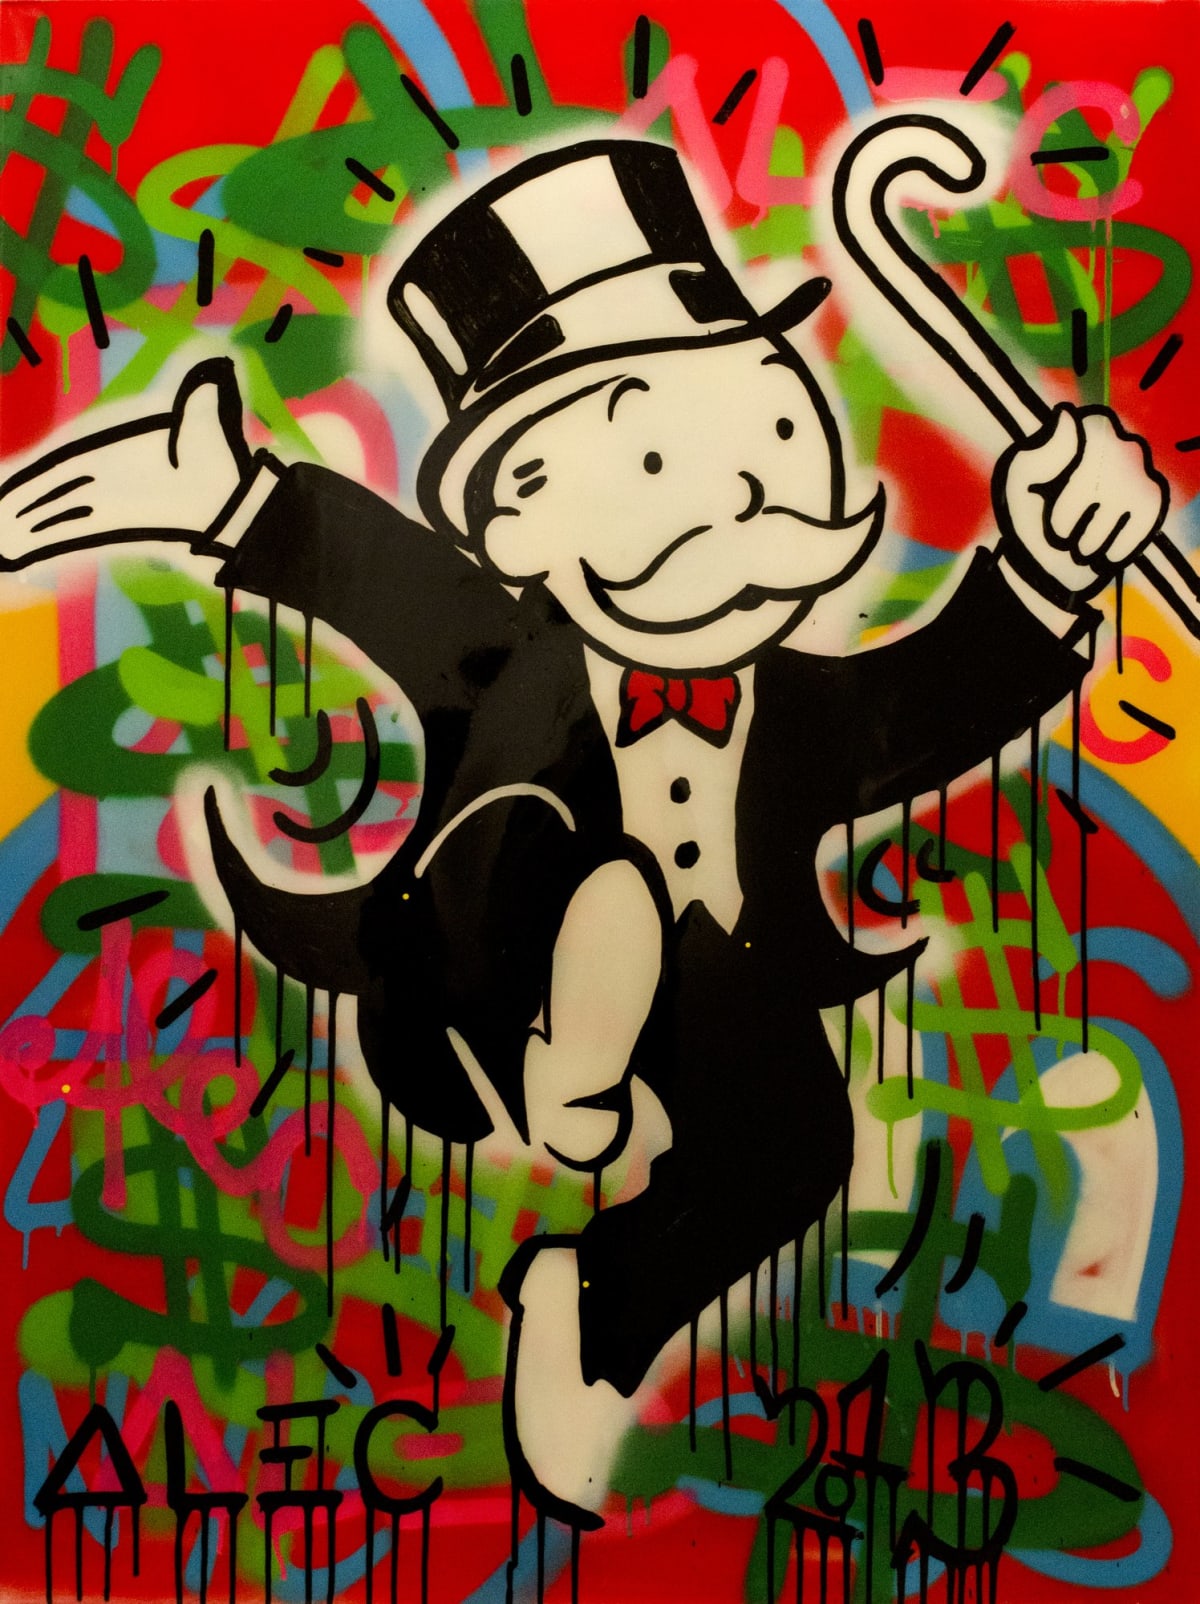 Download The Monopoly Man Being Rich and Outspending His Competition   Wallpaperscom